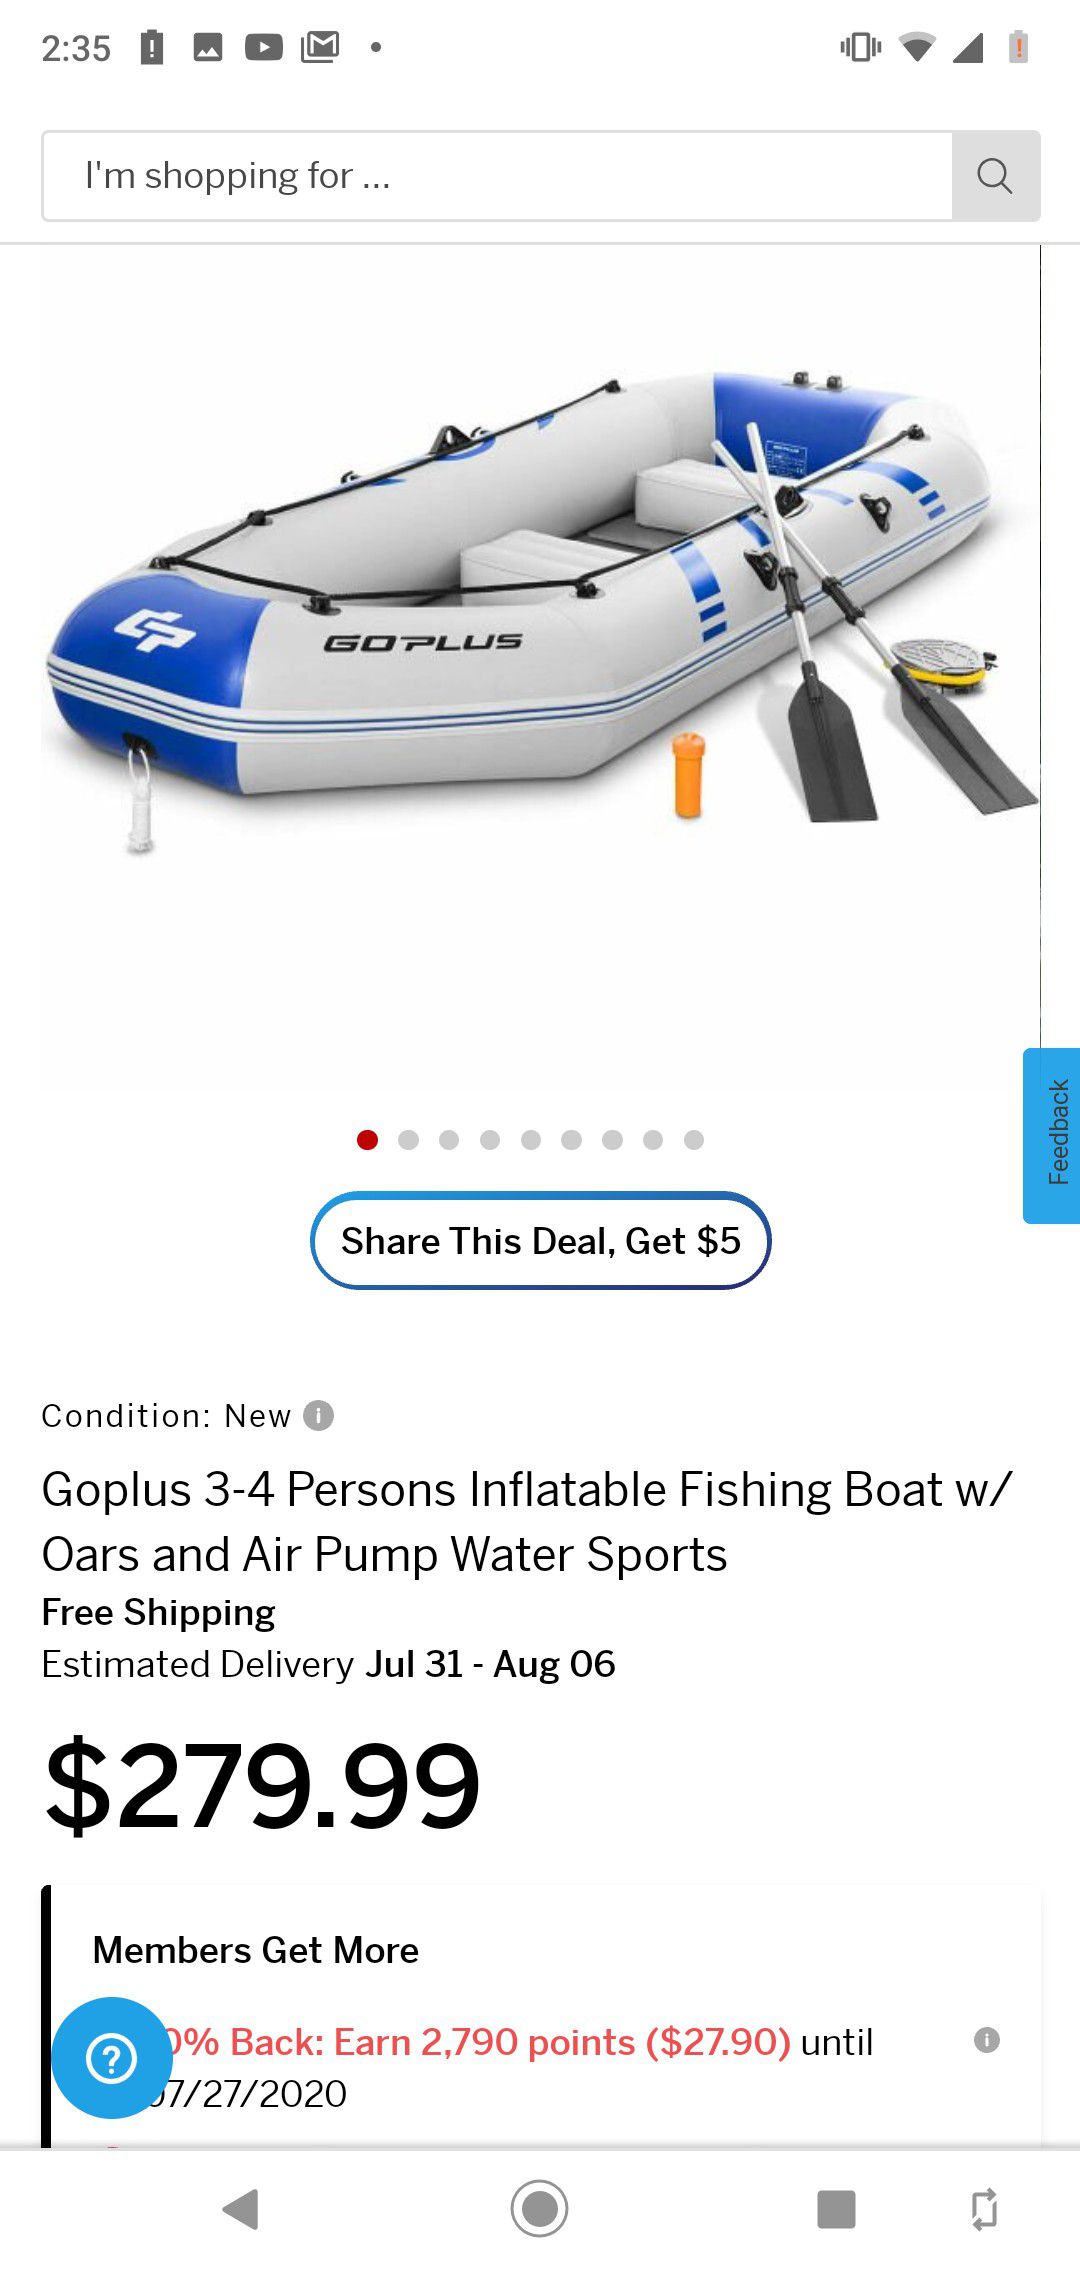 New Inflatable Fishing Boat